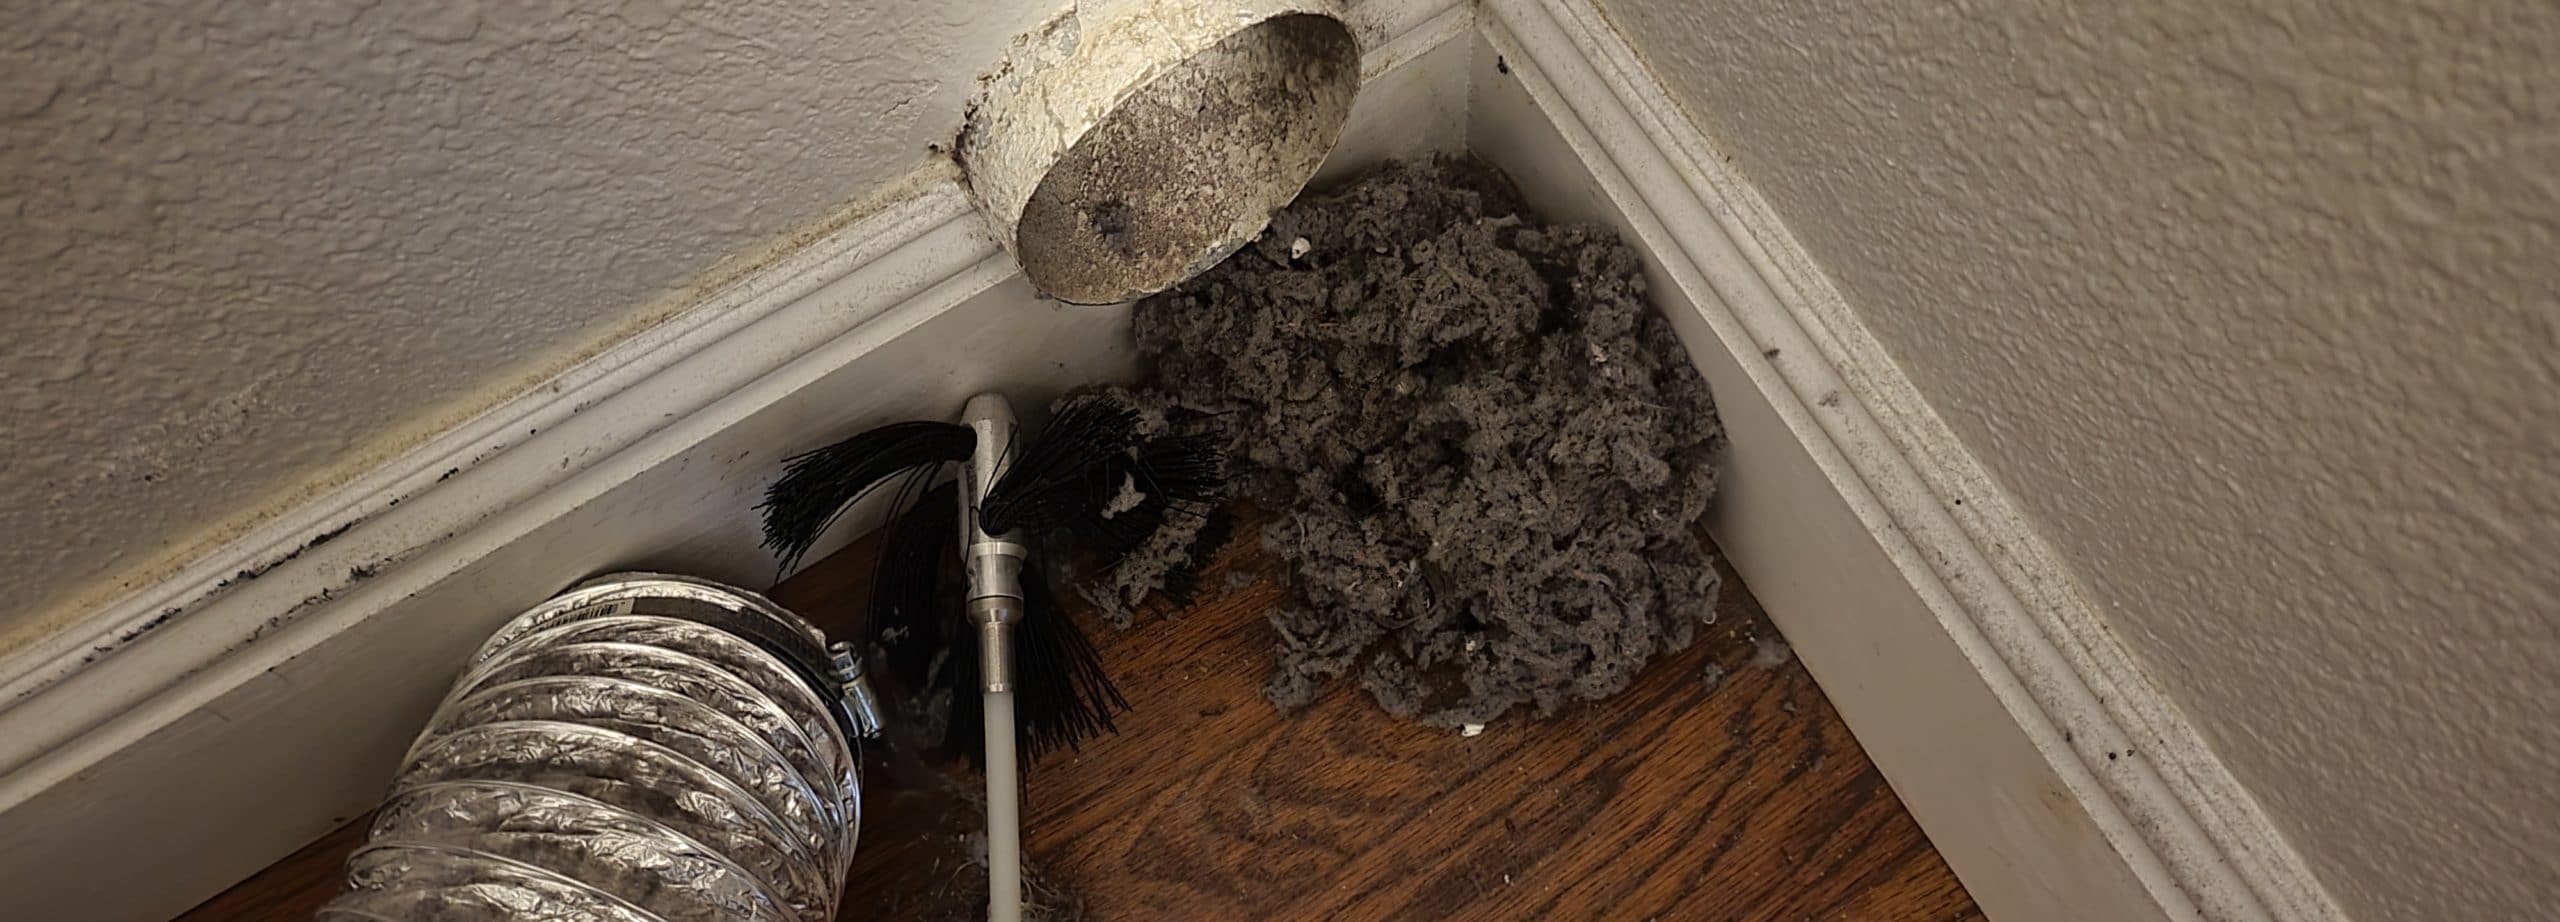 Dryer Vent Cleaning in Sacramento, CA